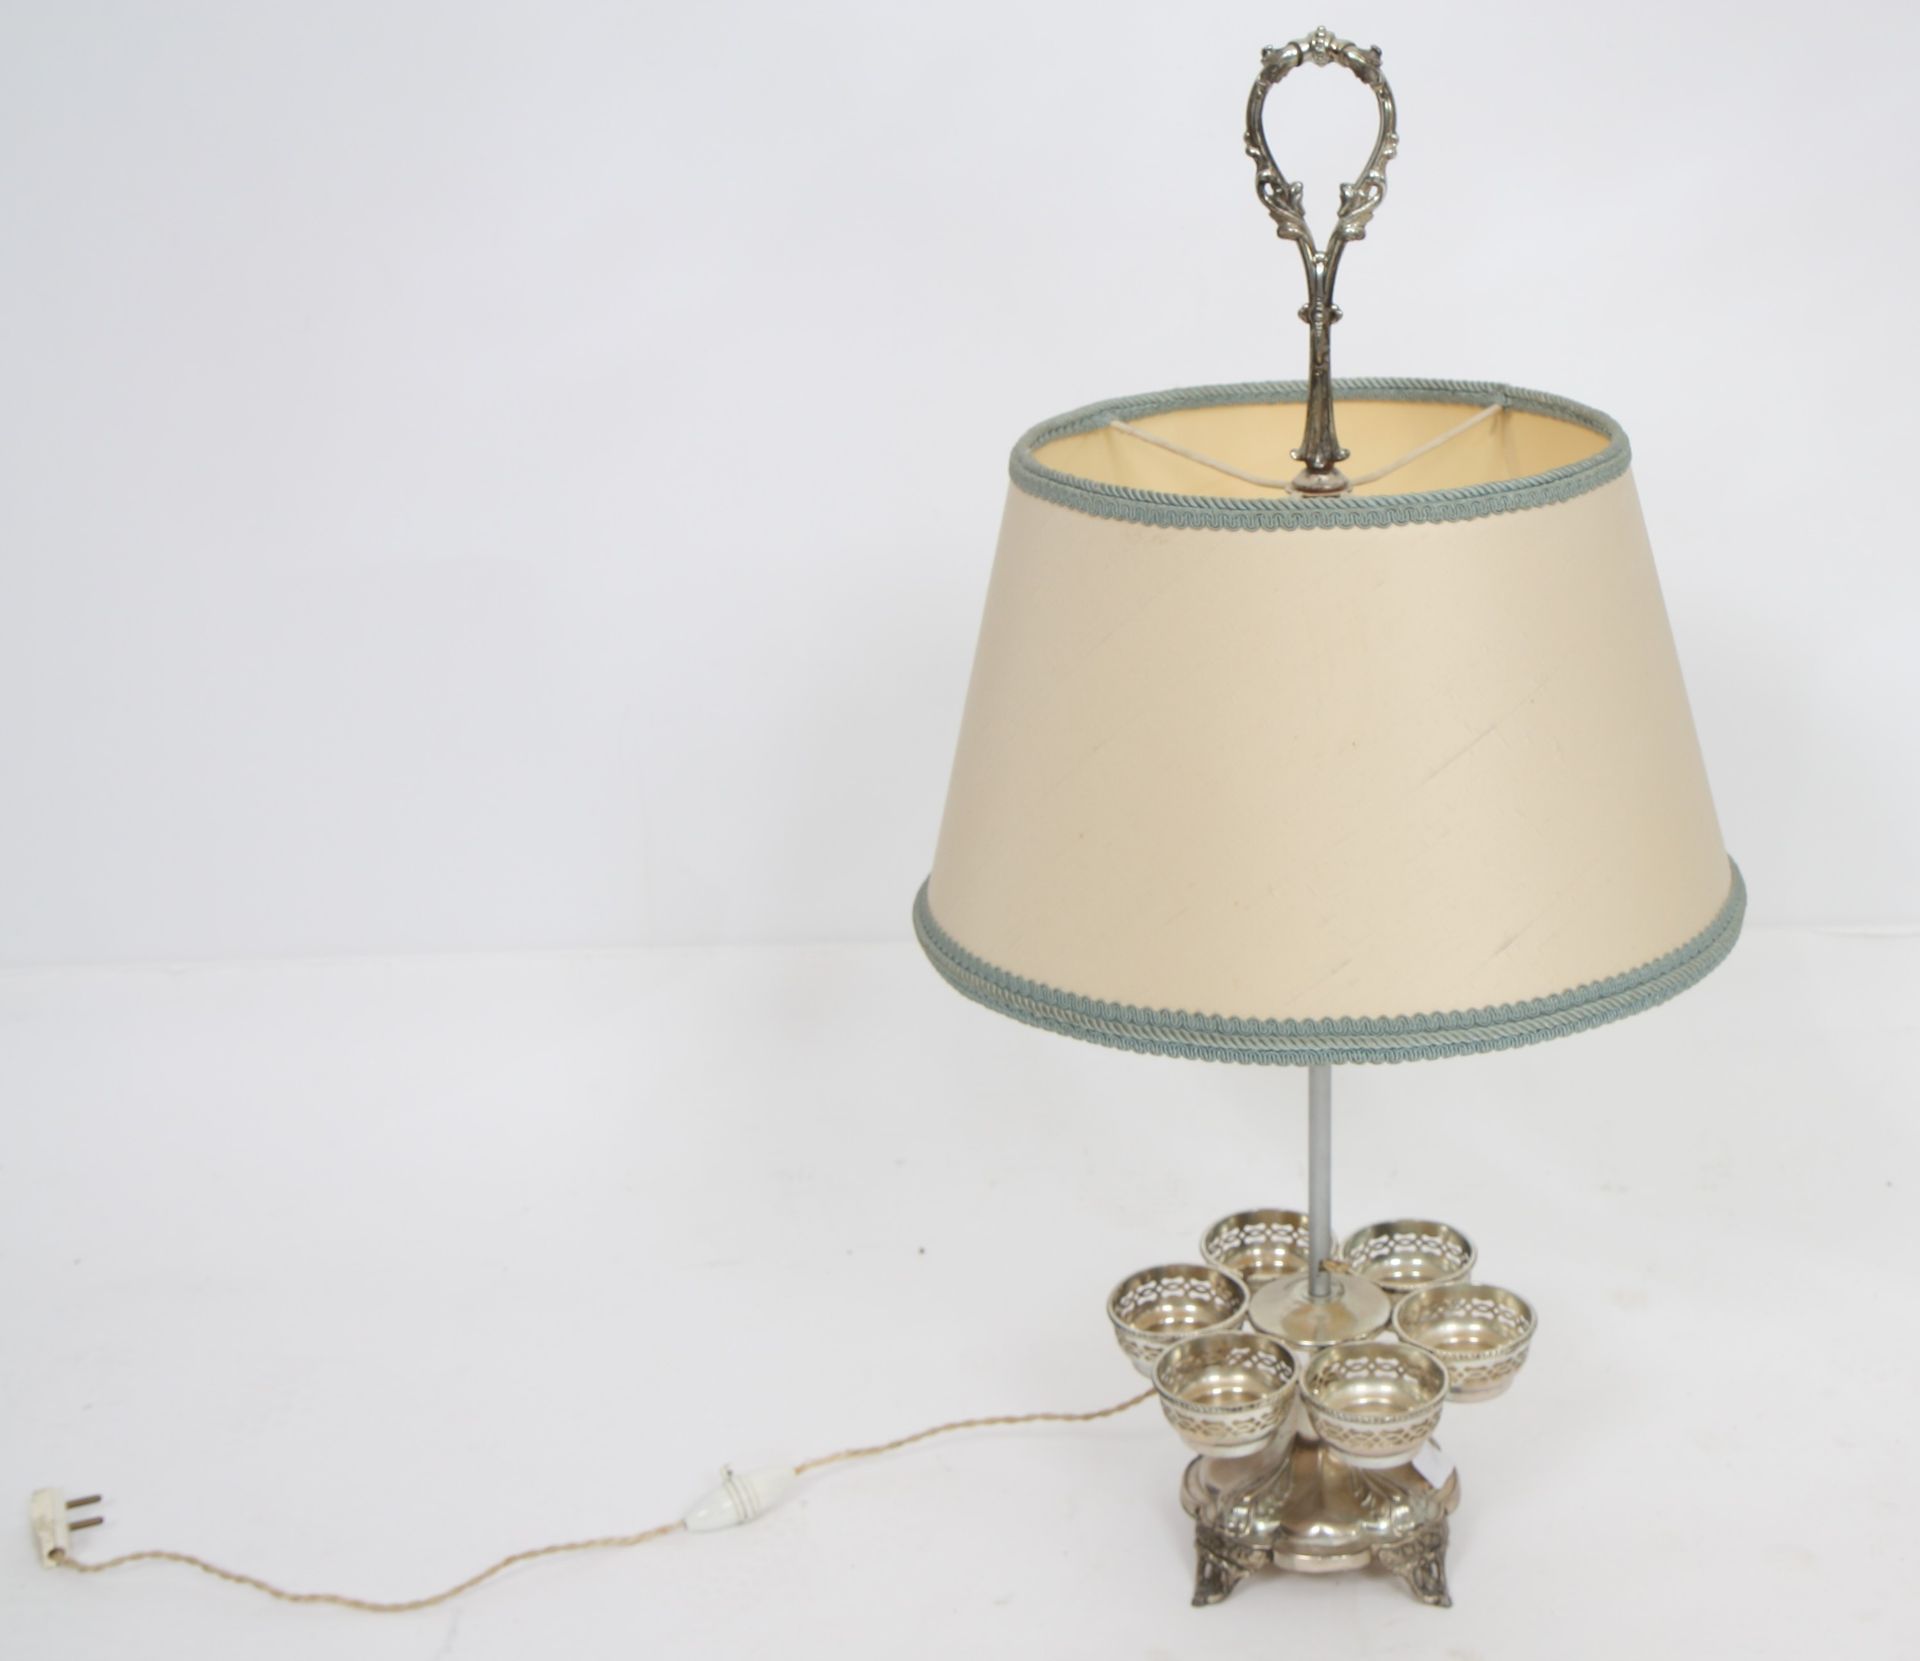 Null LAMP IN SILVER PLATED METAL

Decorated with six openwork bowls

20th centur&hellip;